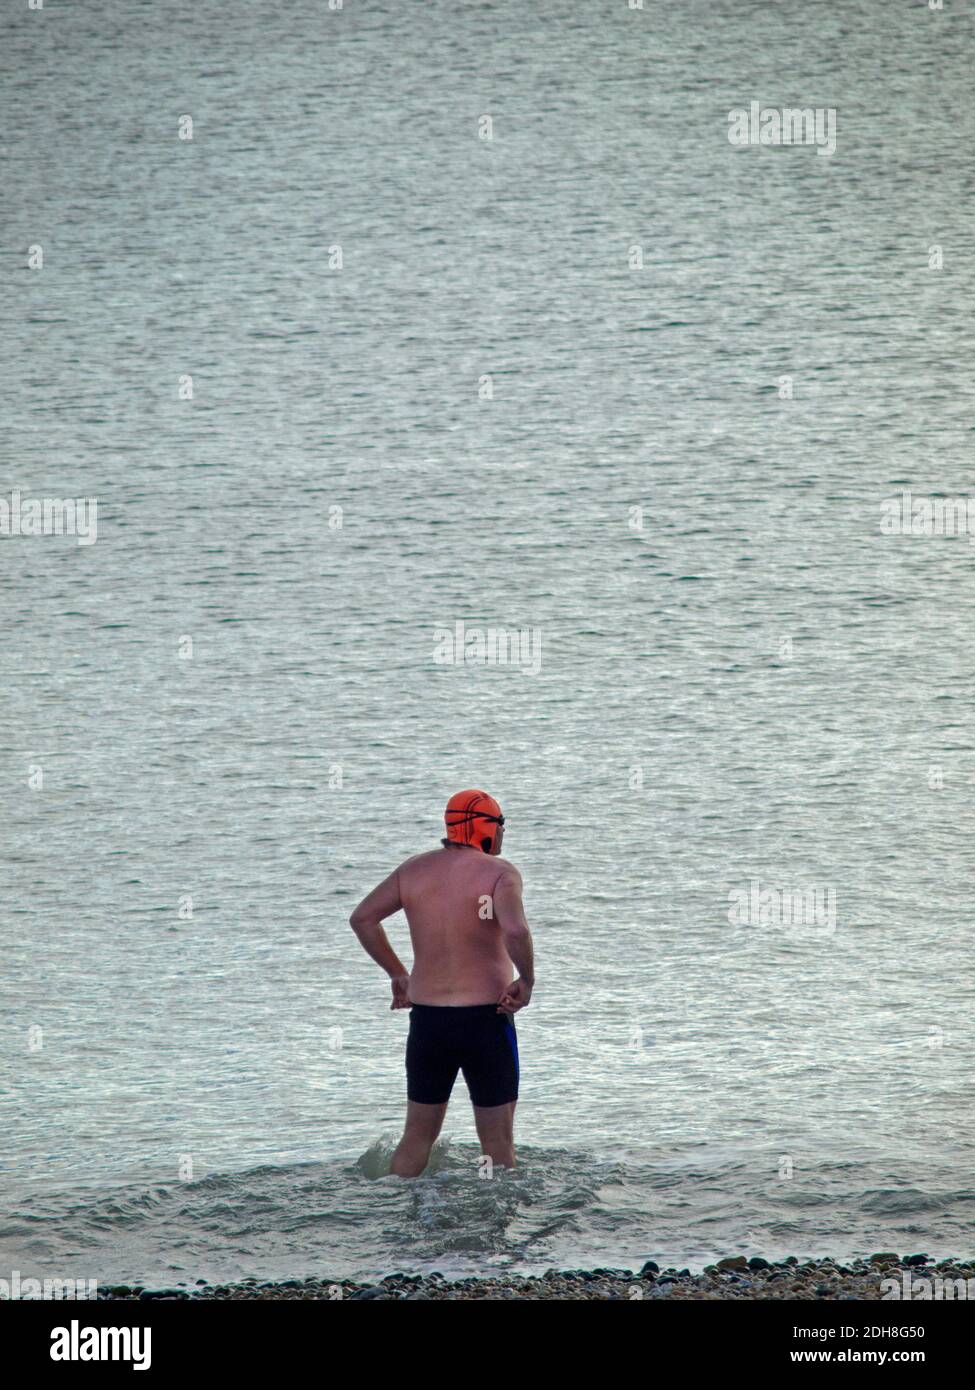 A swimmer enters the sea at Brighton, England Stock Photo